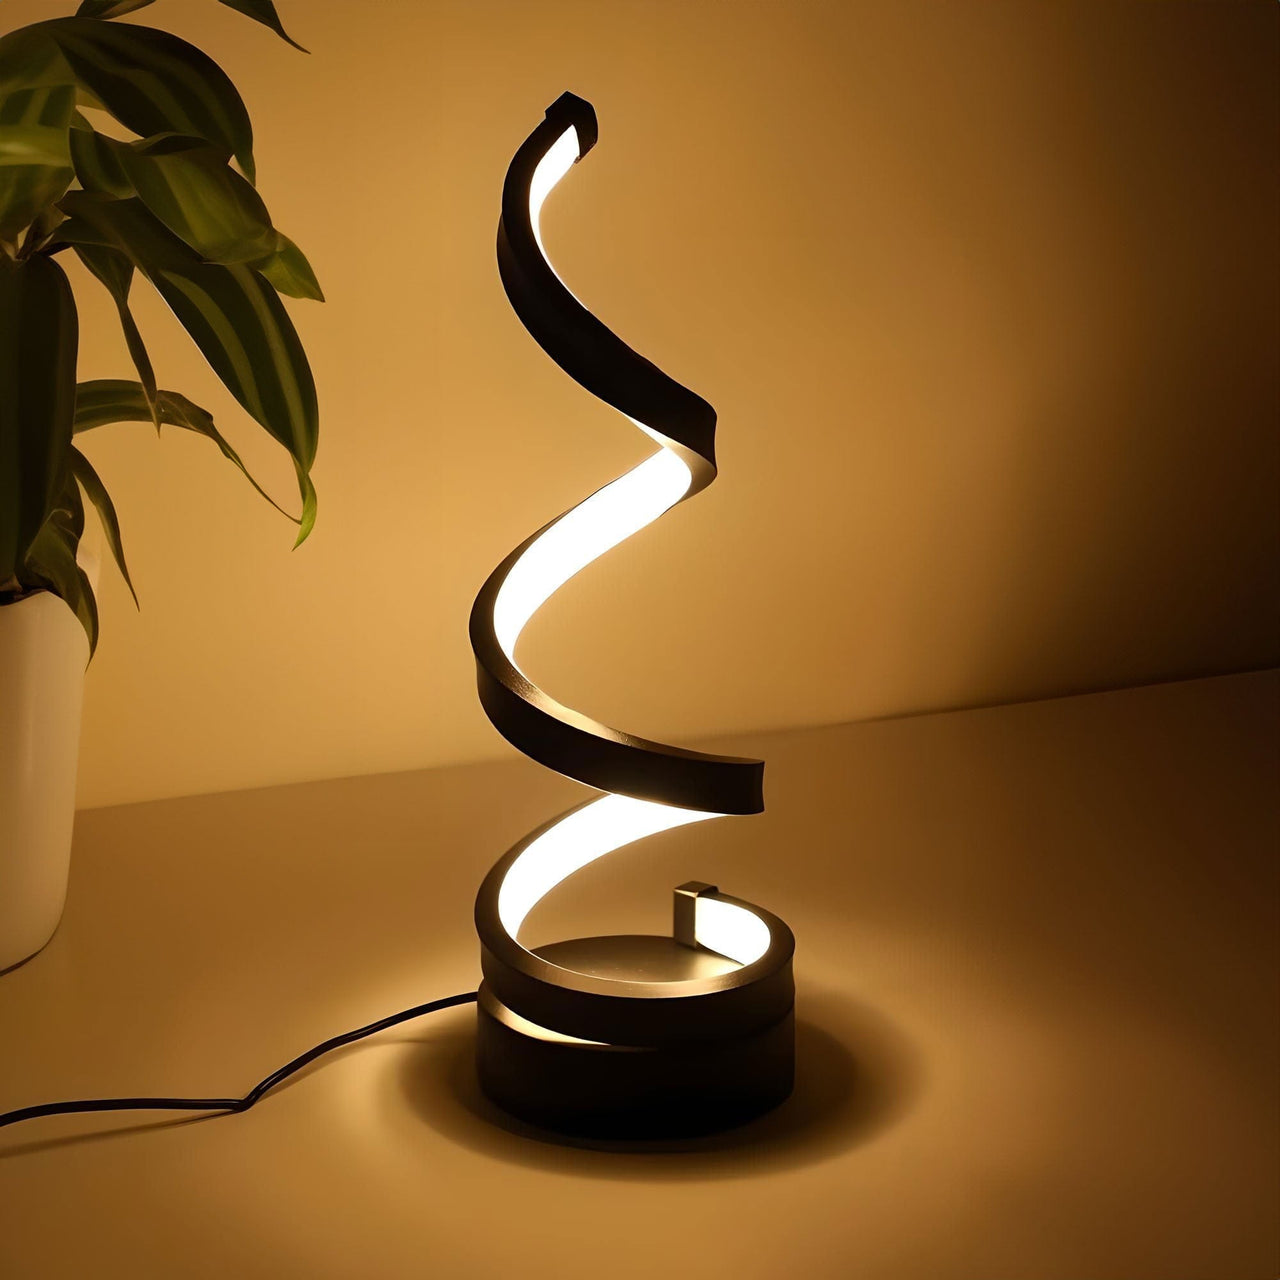 The Spiral Table Lamp